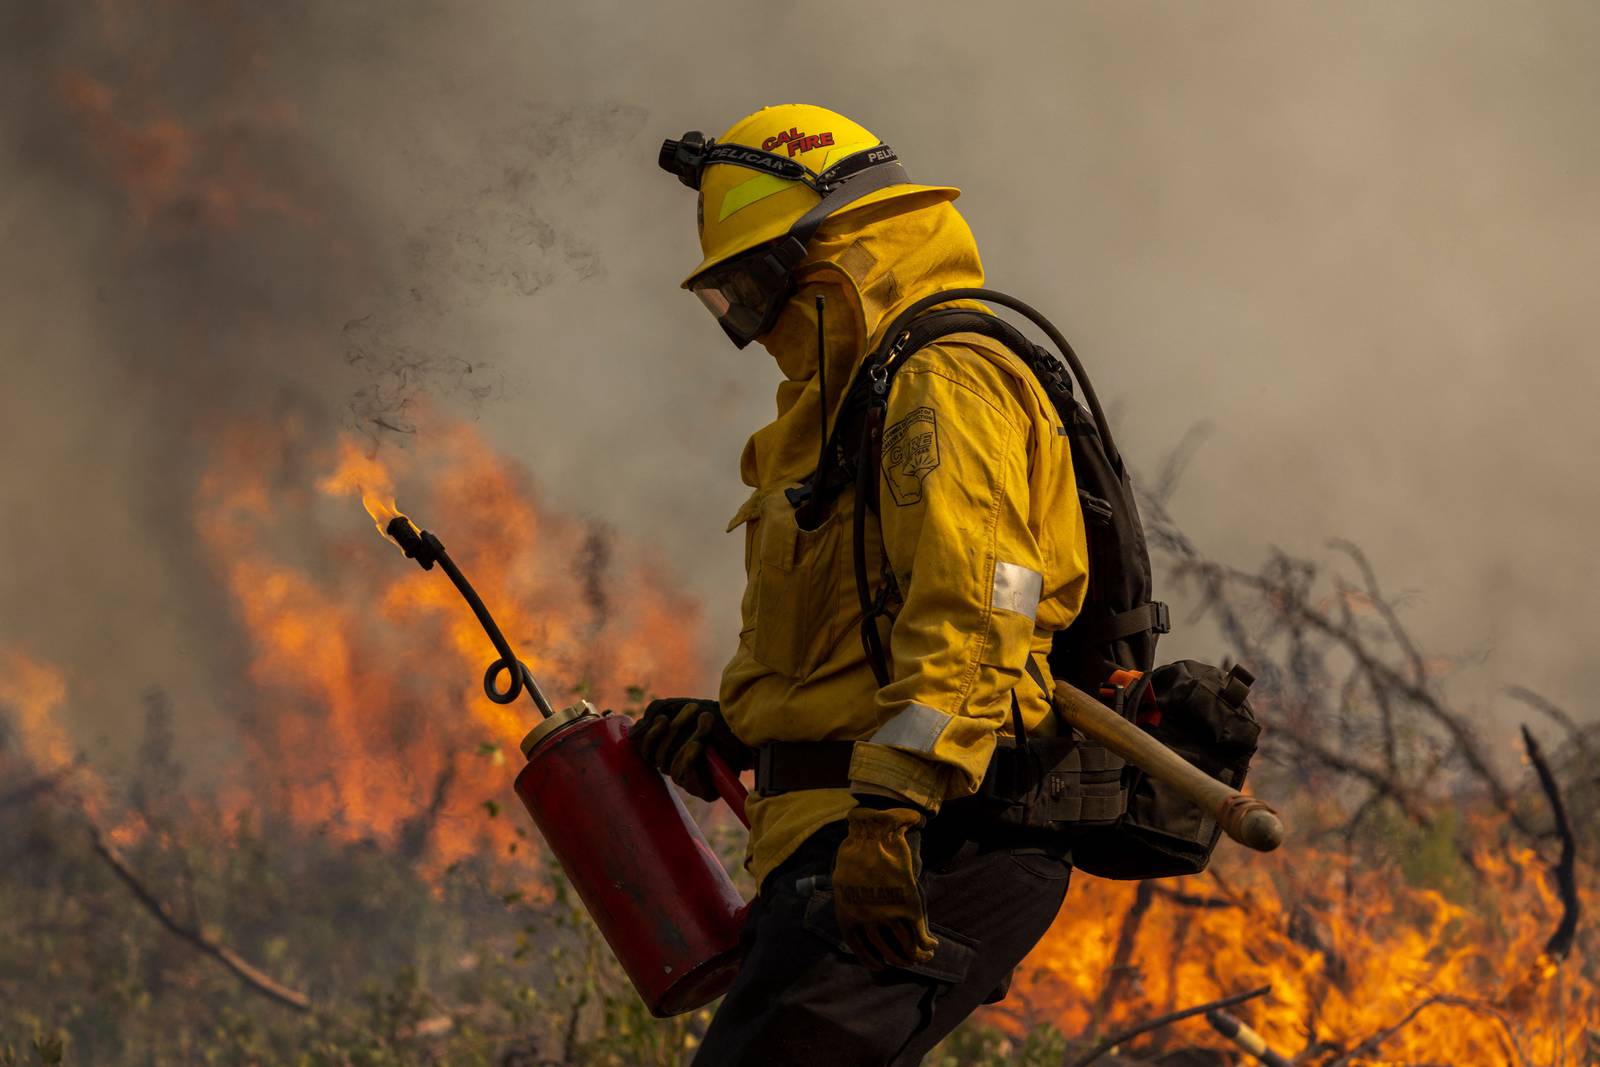 A firefighter uses a drip torch to light a backfire at the Oak Fire near Mariposa, California, on July 24th. Photograph: David McNew/AFP via Getty Images